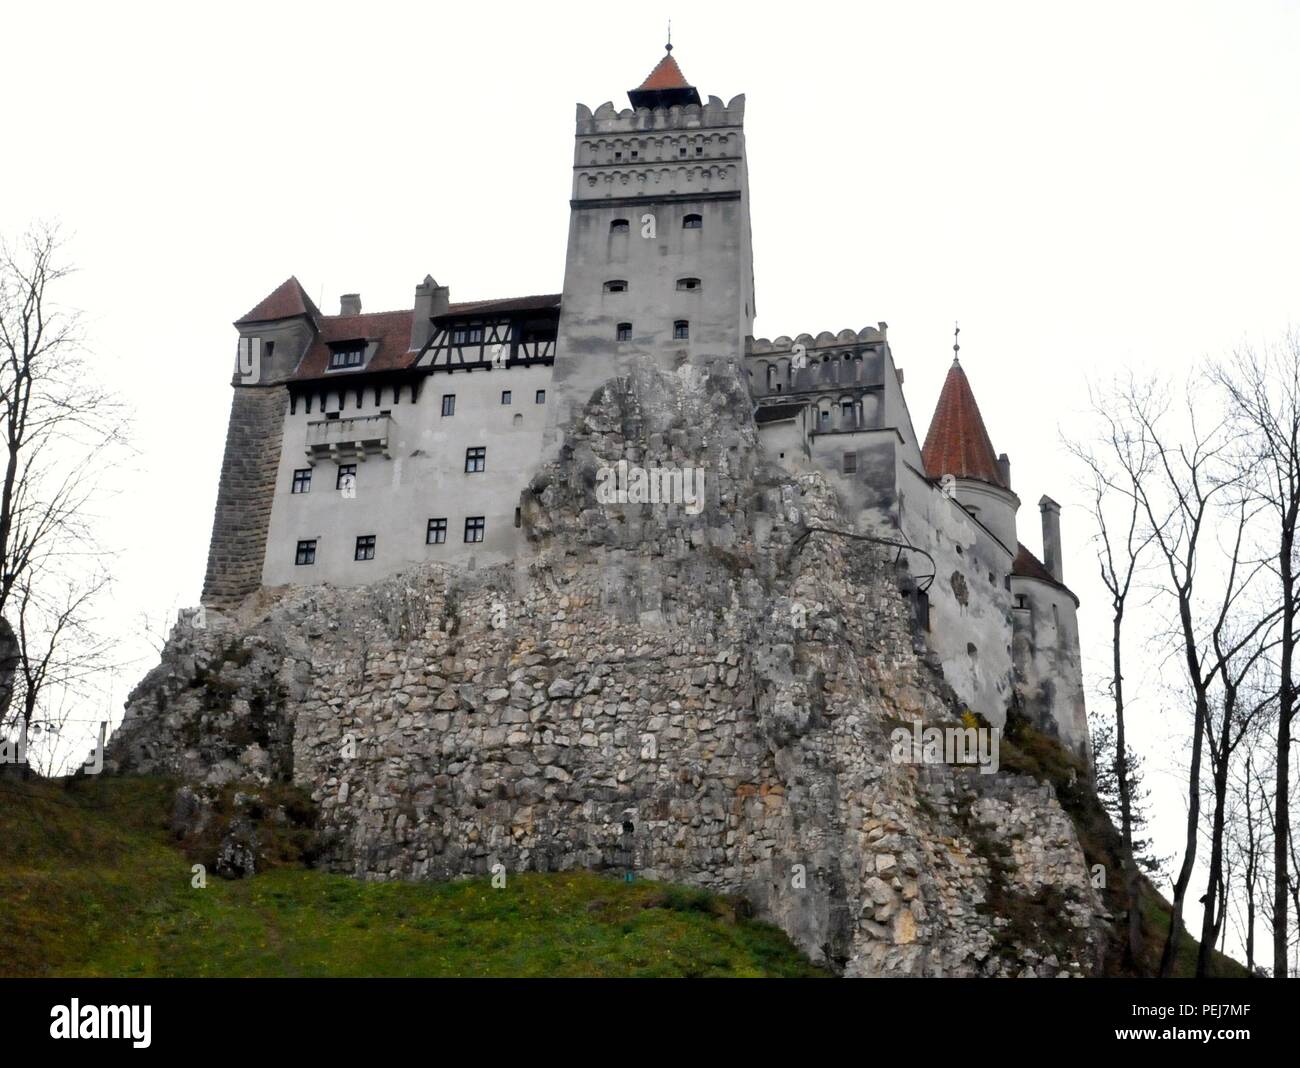 Soldiers of 5th Squadron, 7th Cavalry Regiment got this view of Bran Castle, or more famously known as Dracula’s Castle, on the cultural trip taken in late November 2015. The soldiers are stationed out of Fort Stewart, Ga. and are currently deployed at MK Air Base in Romania in support of Operation Atlantic Resolve. The trip to the castle allowed the soldiers an opportunity to see and learn historical aspects of Romania. (U.S. Army photo by Capt. Jennifer Cruz/ Released.) Stock Photo